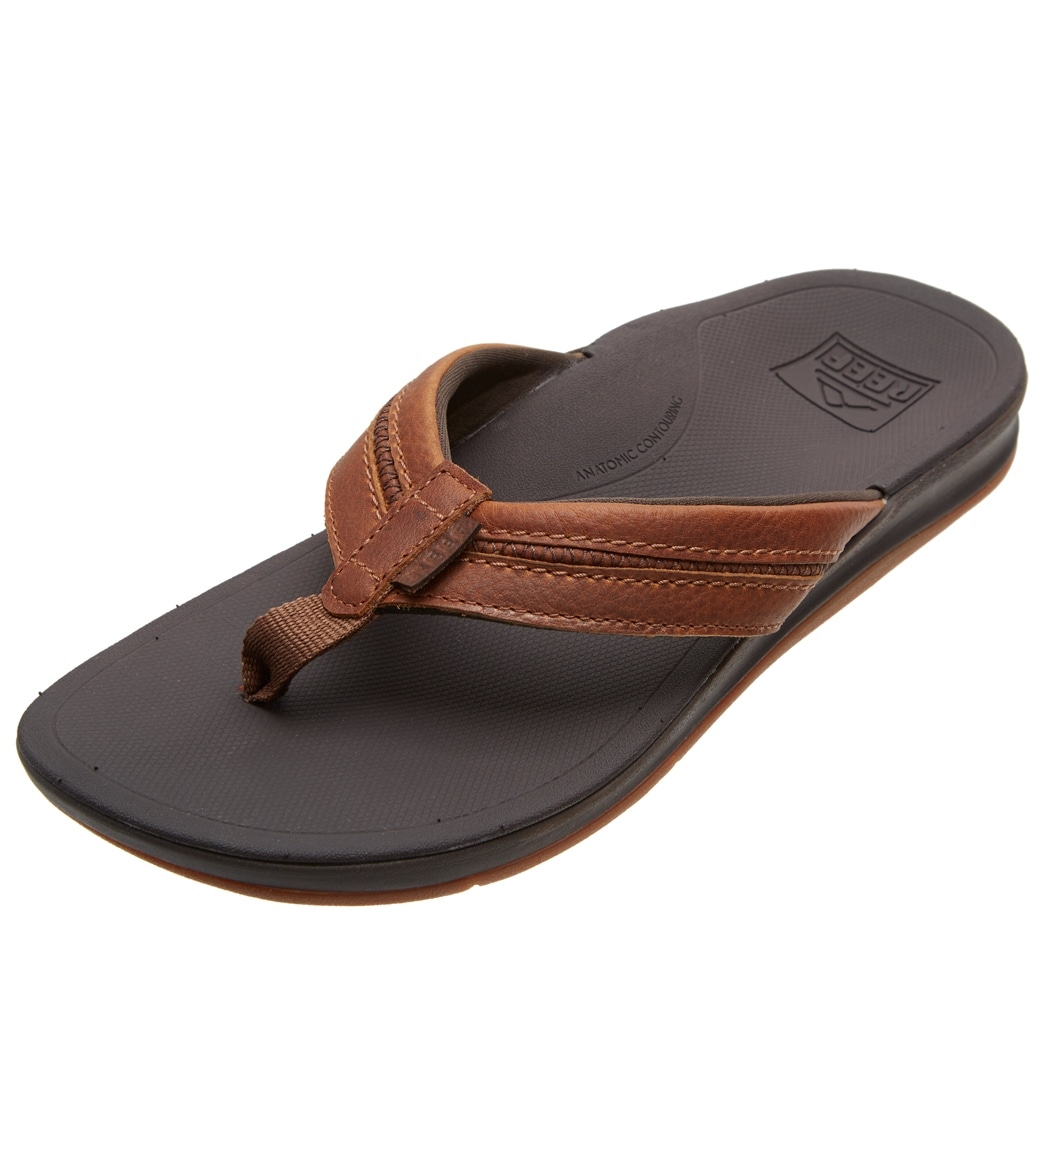 Reef Leather Ortho-Bounce Coast Flip Flop - Brown 8 - Swimoutlet.com